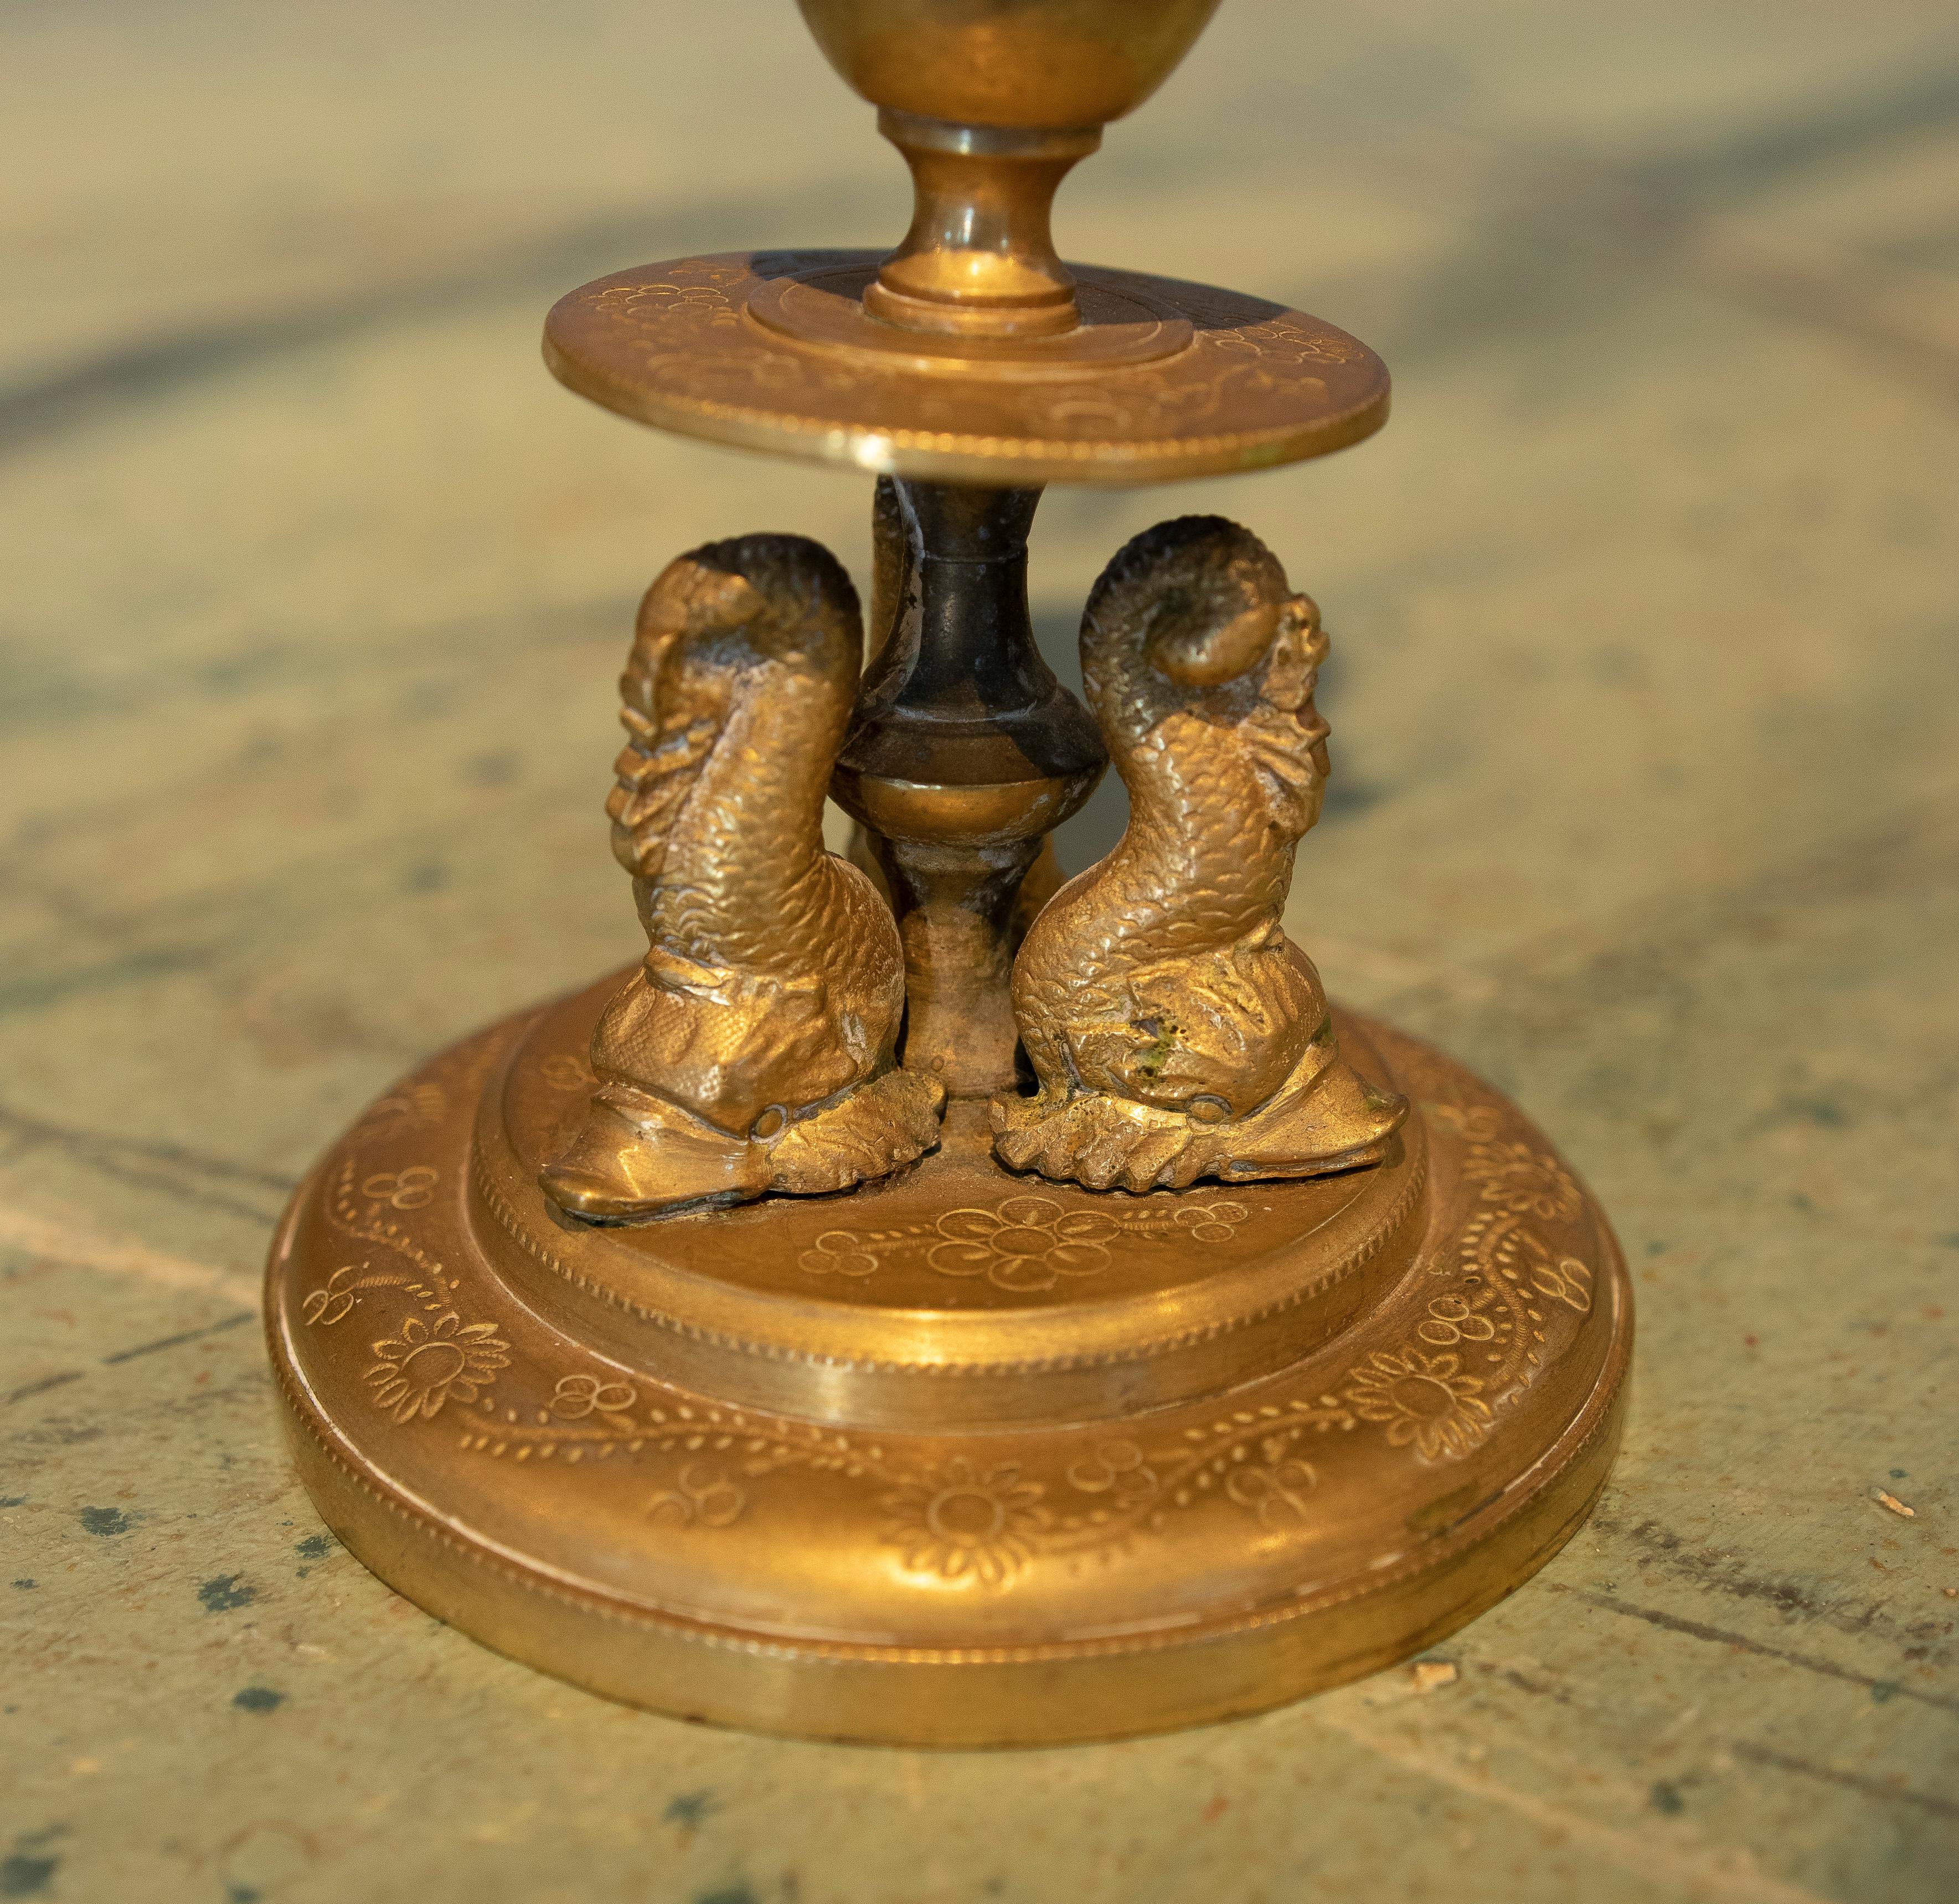 19th Century French Gilt Bronze Sconce W/ Decorative Fish Figures on Base For Sale 2